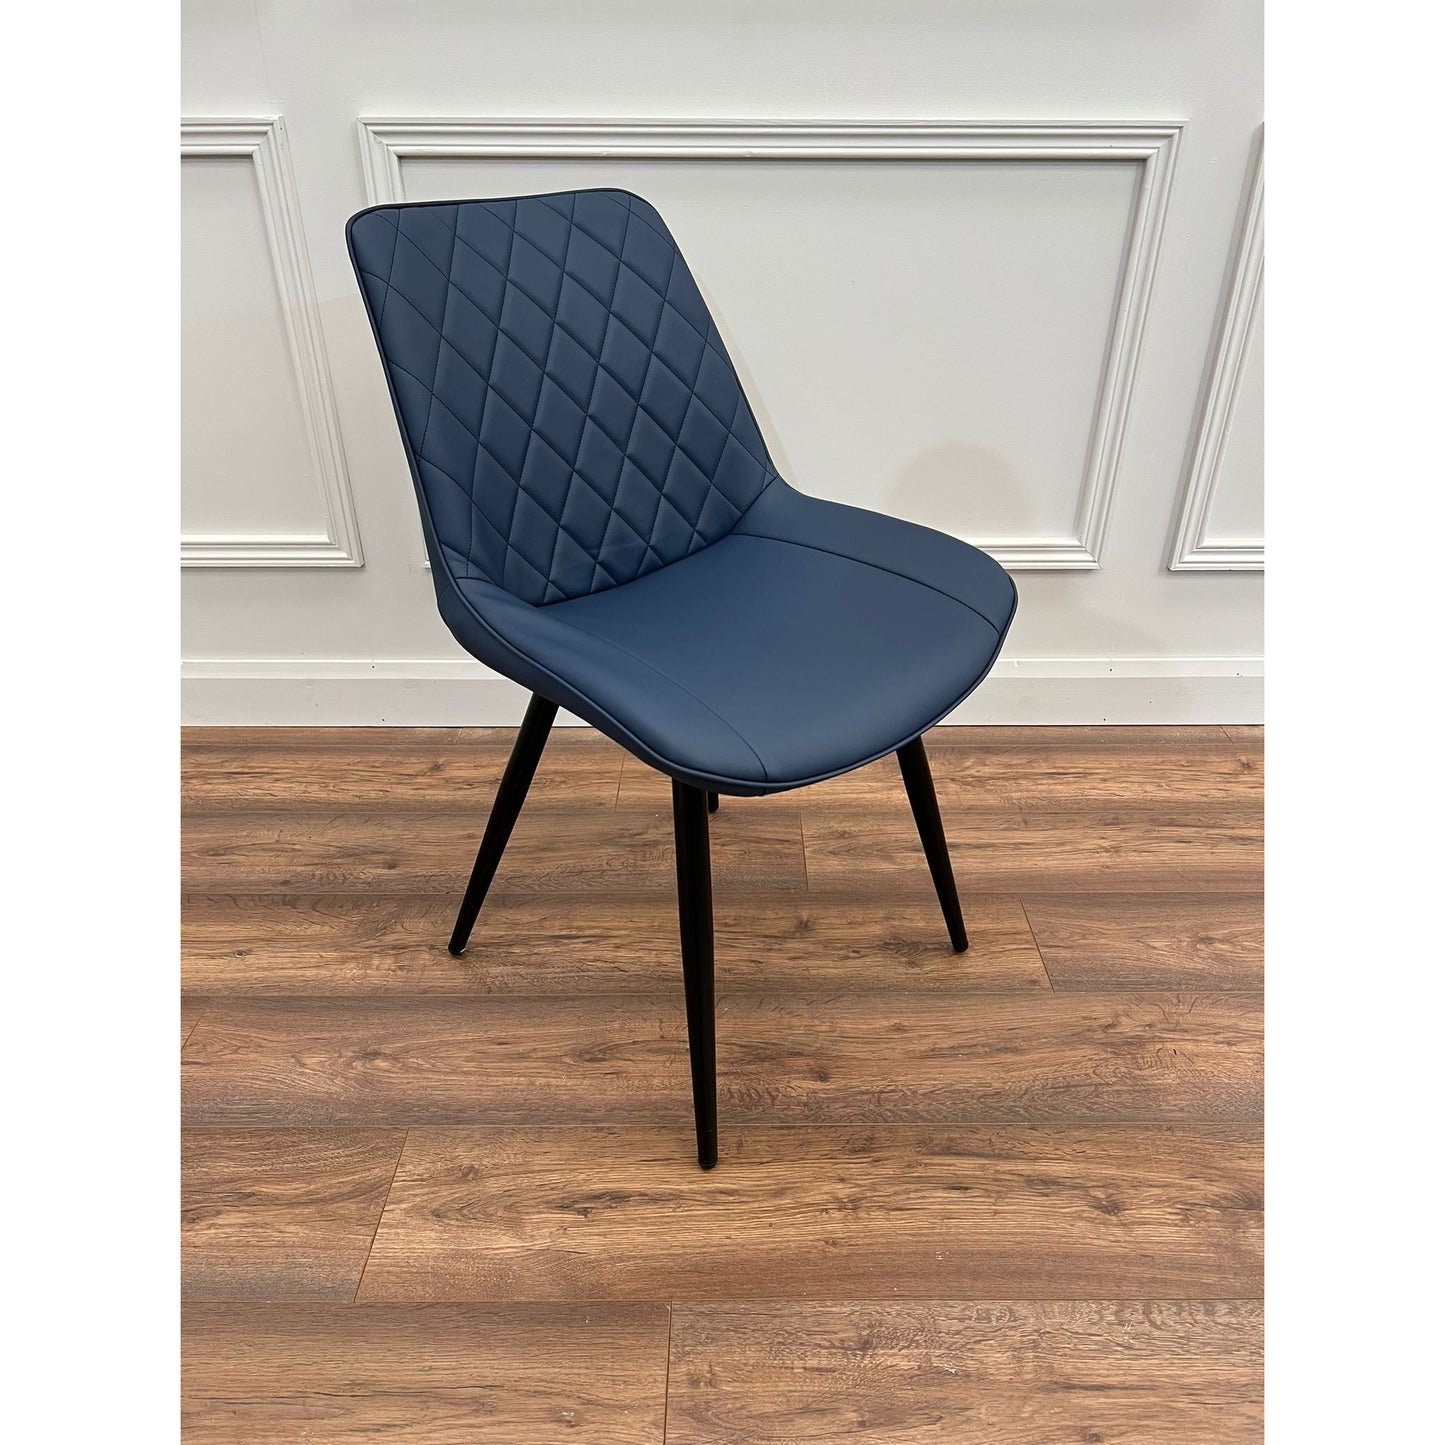 Selena - Navy leatherette Dining Chair